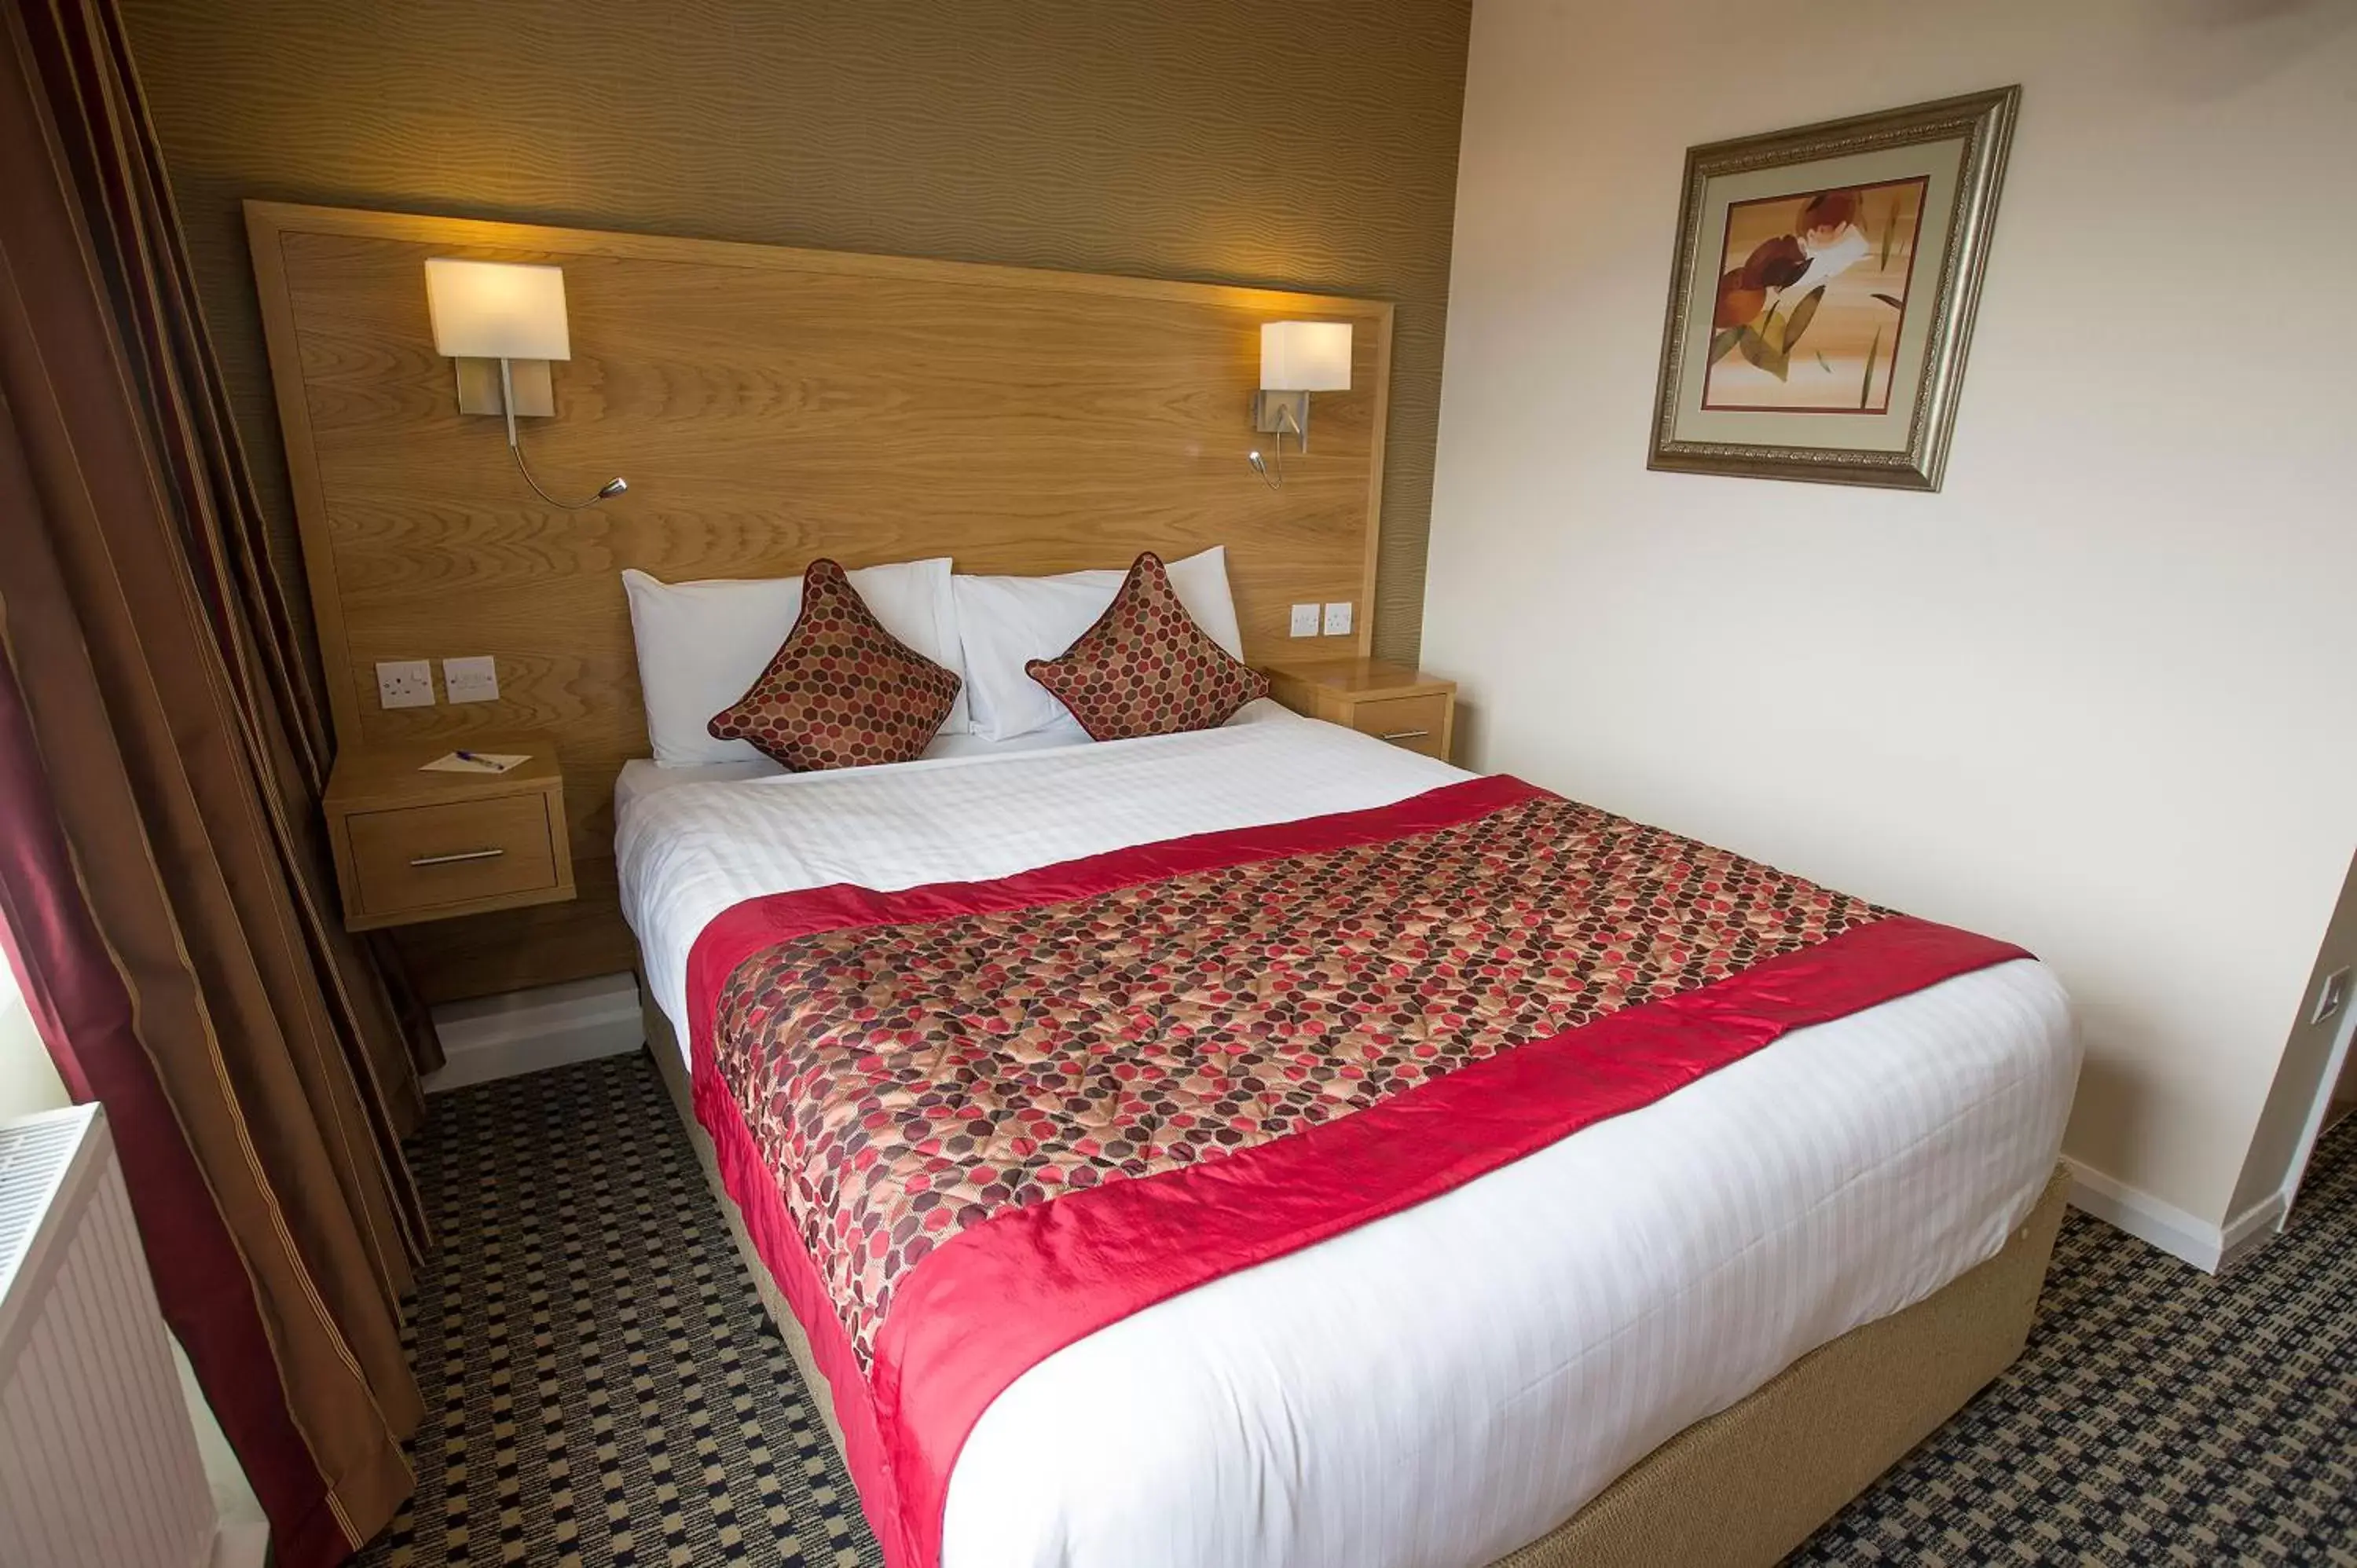 Bed, Room Photo in Park Hall Hotel and Spa Wolverhampton